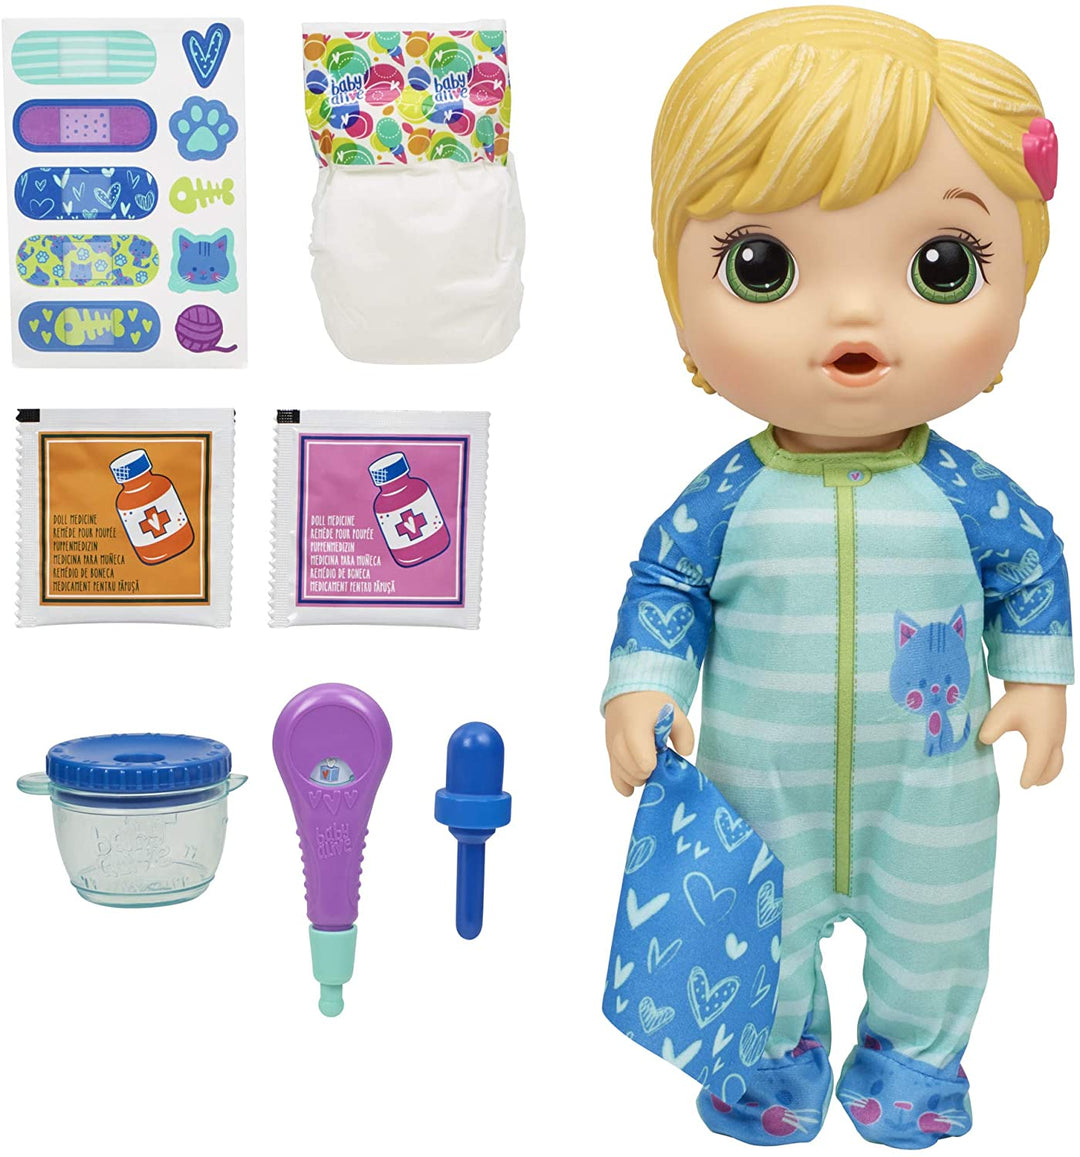 Baby Alive Mix My Medicine Babypop, Kitty Cat Pyjama Drinks and Wets Doctor Accessoires